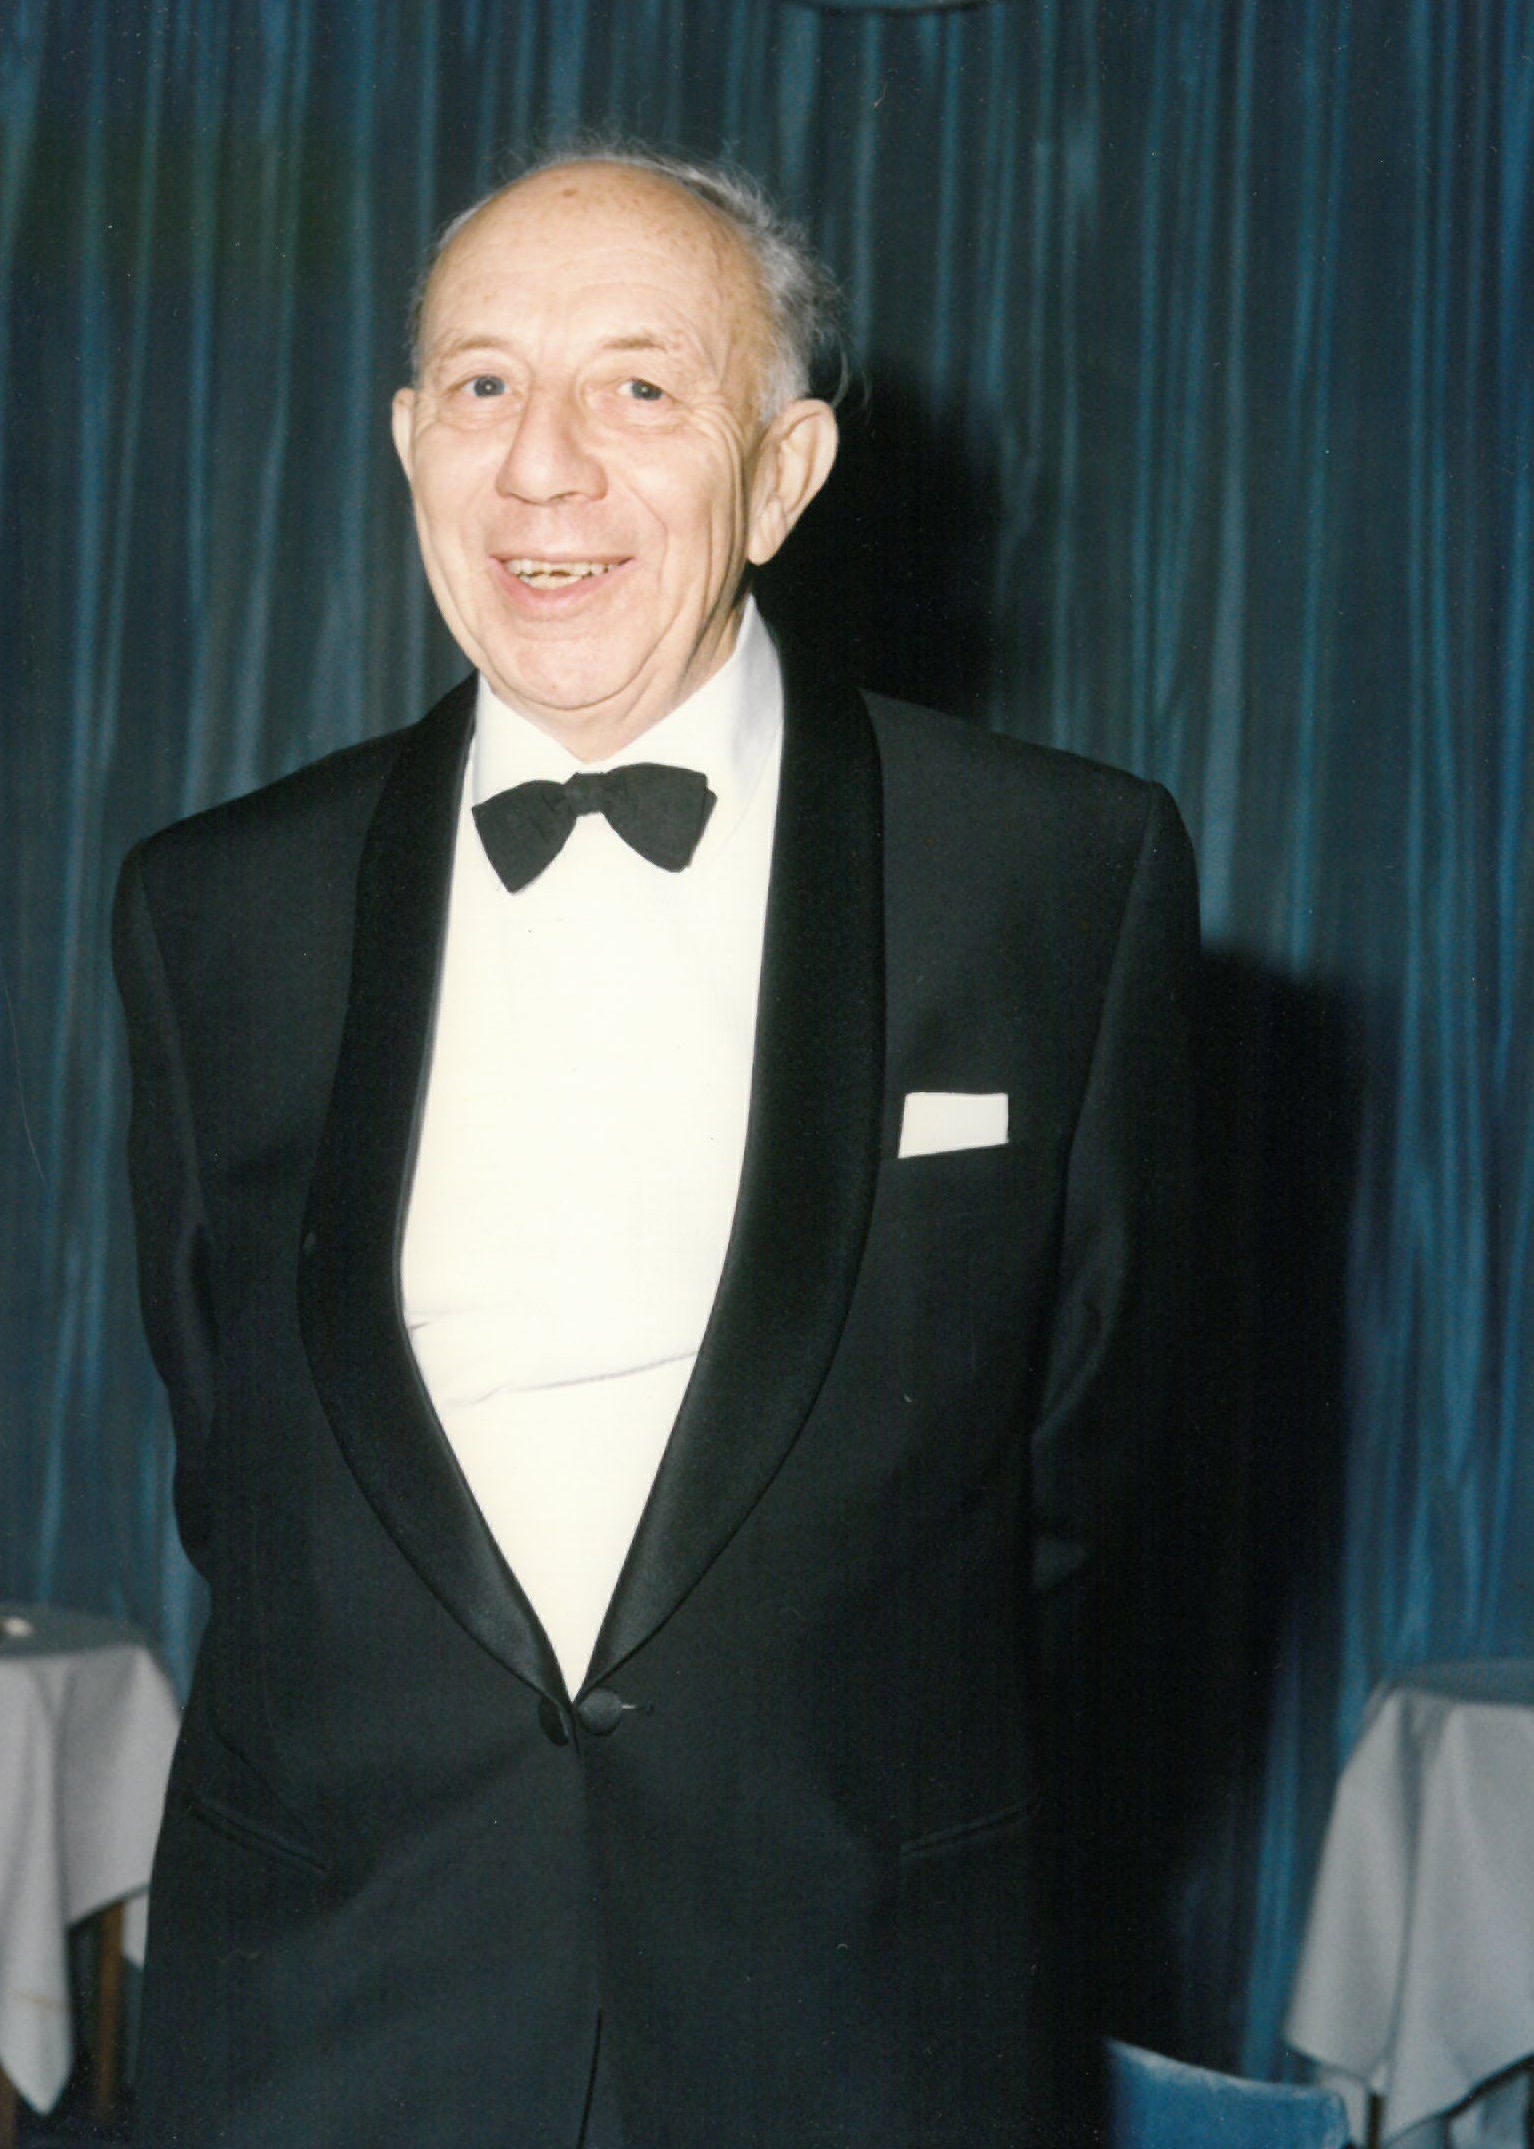 Photograph of Donald Chesworth in a dinner suit and bow tie